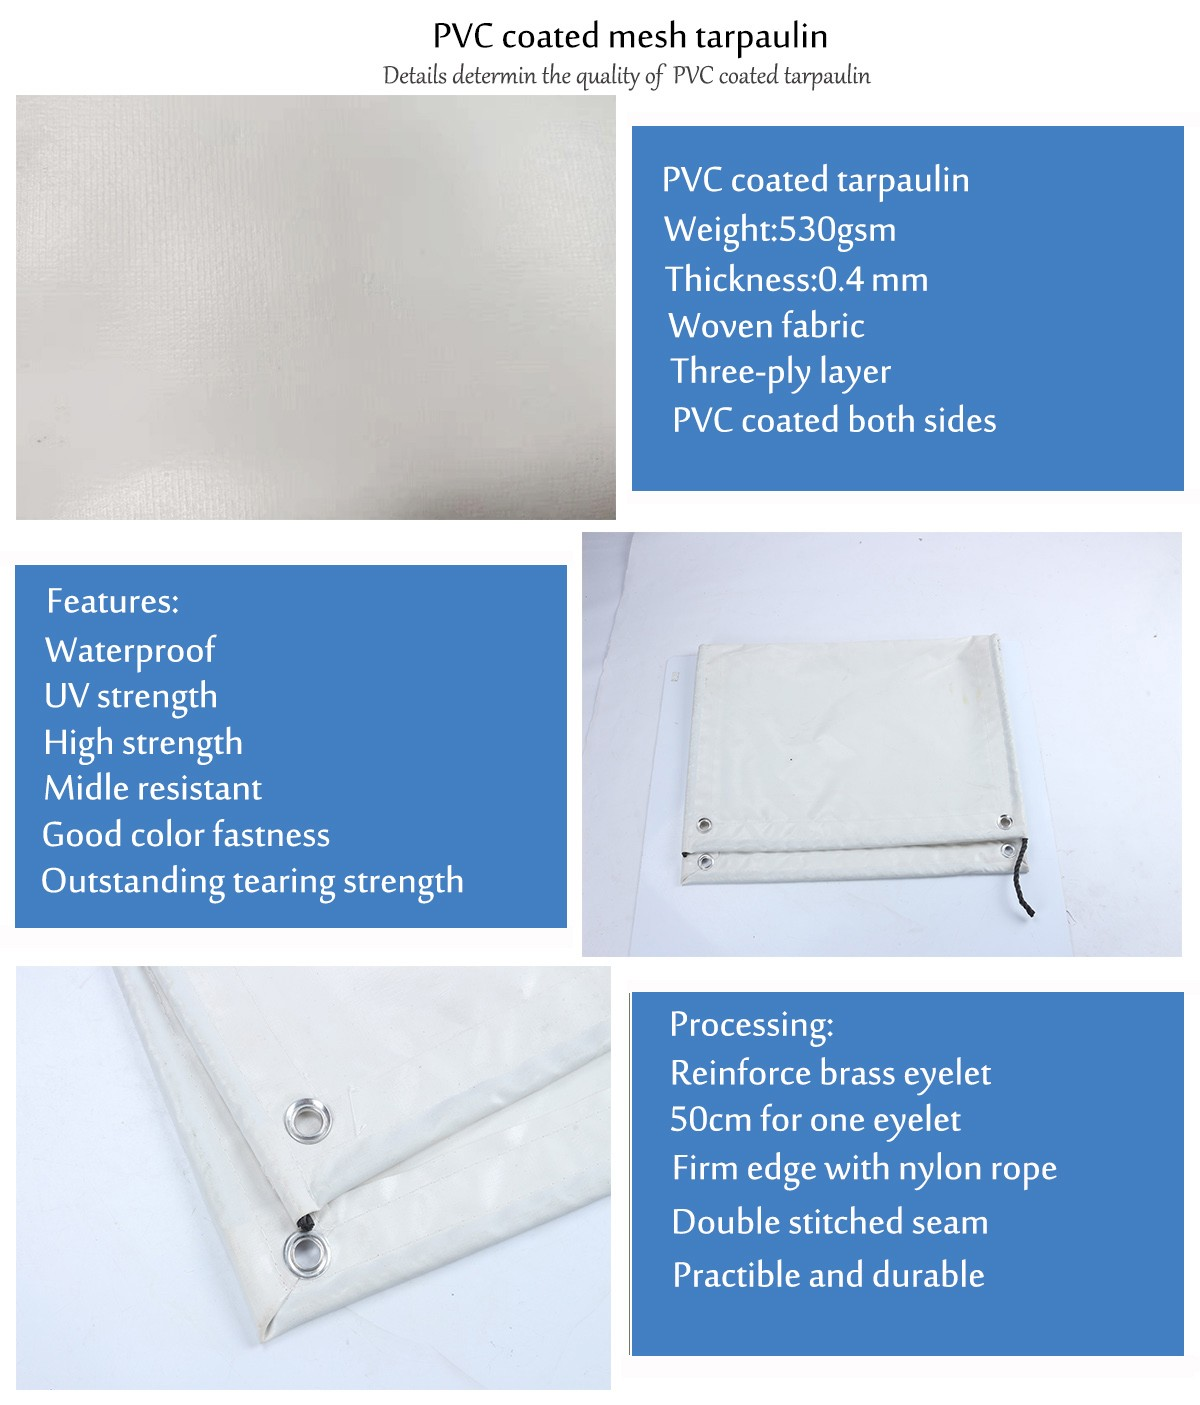 White PVC coated tarpaulin for awning cover